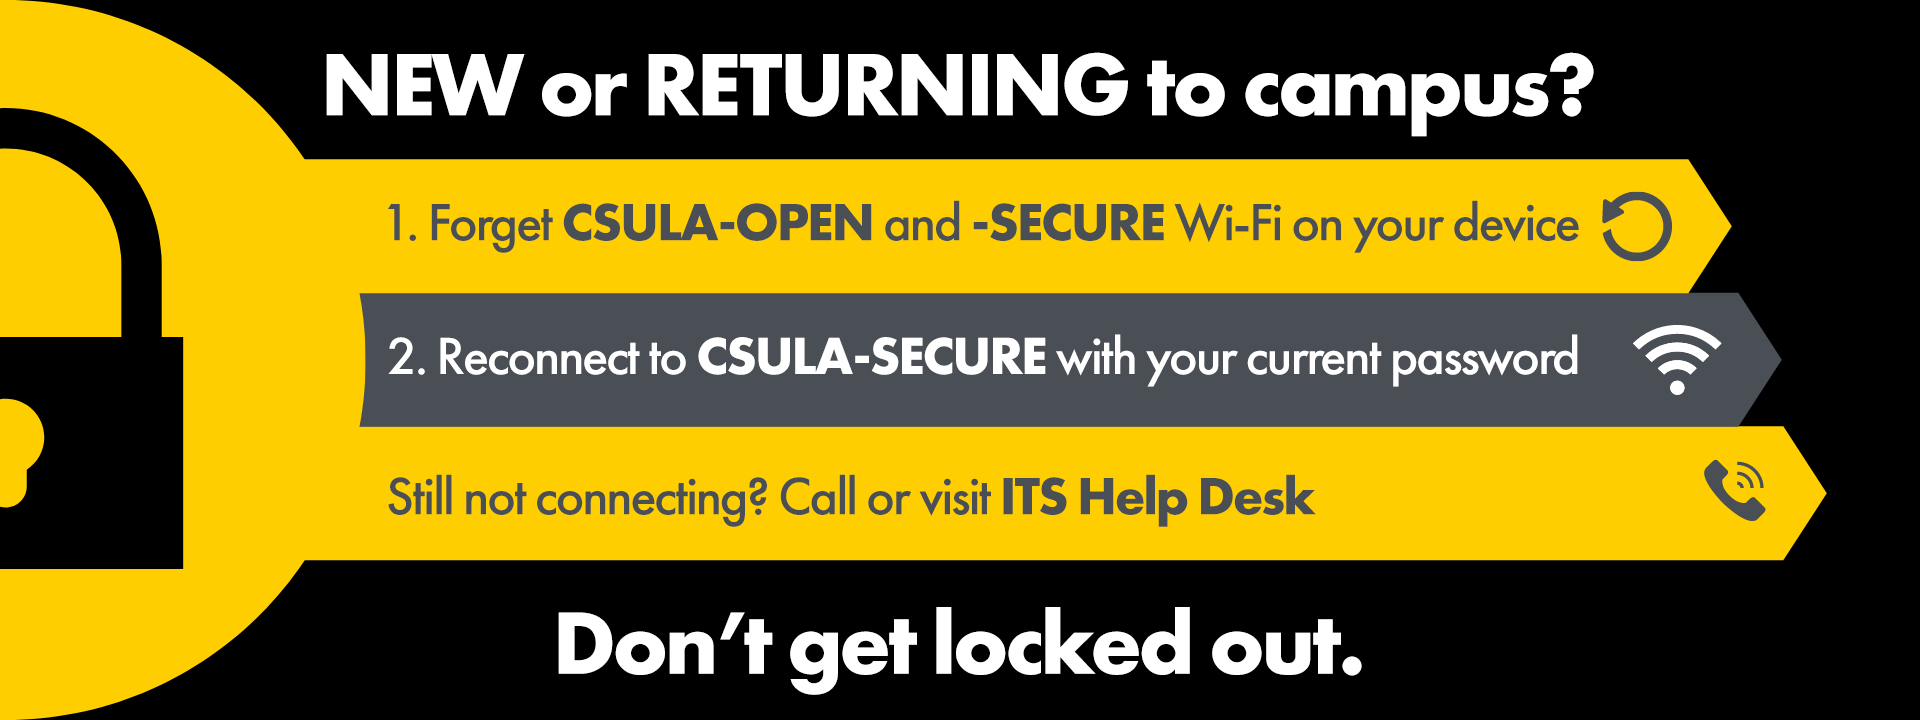 Don't get locked out. Forget CSULA-OPEN & SECURE Wi-Fi on your device, then reconnect to CSULA-SECURE with your current password